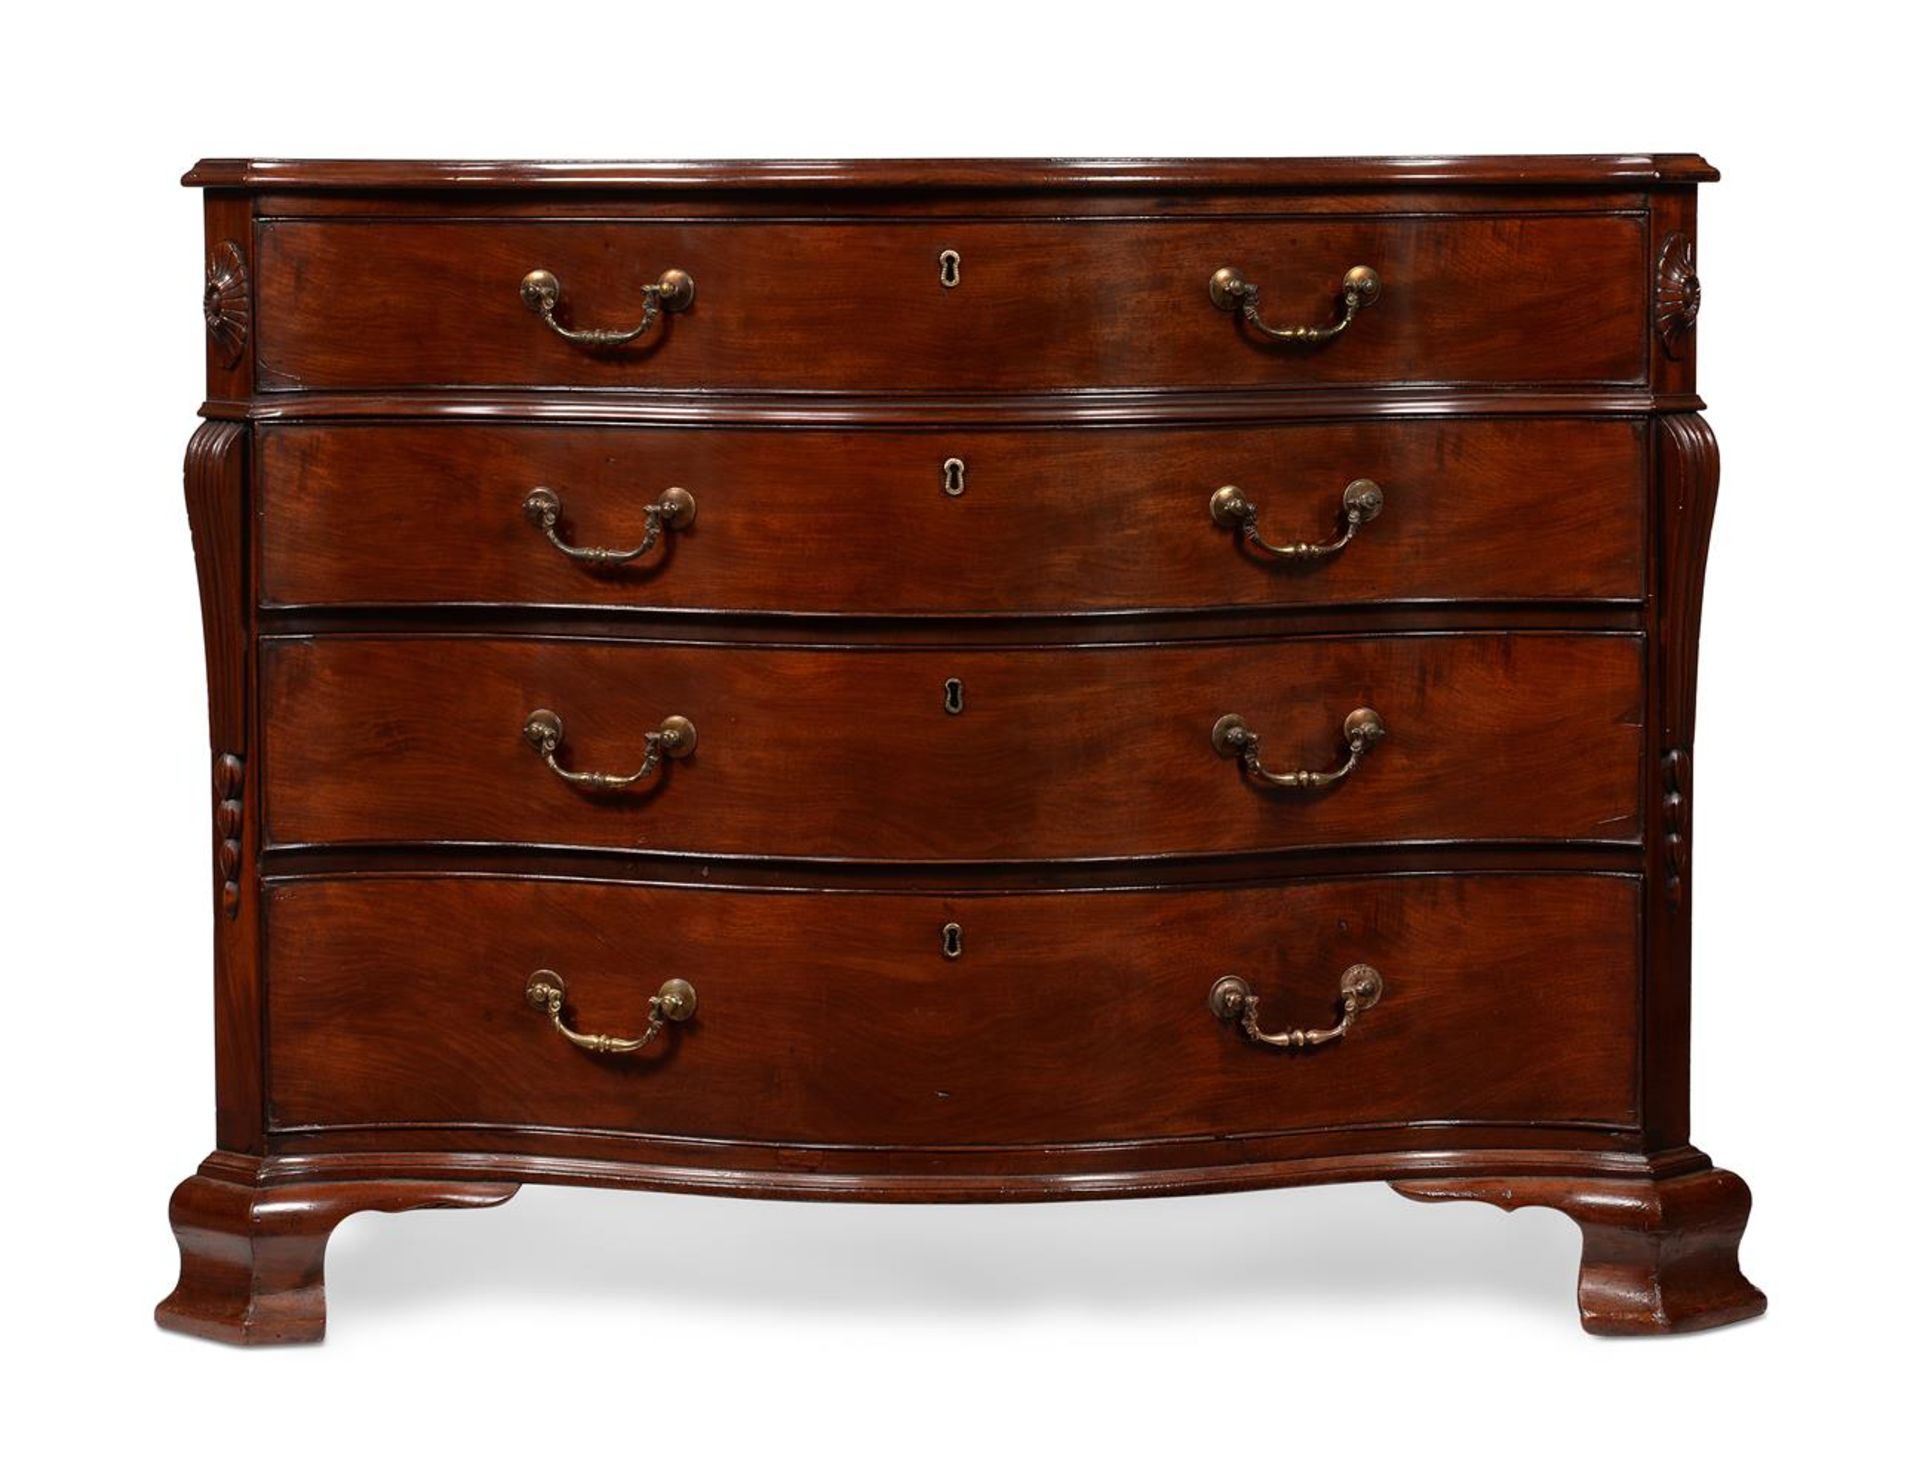 A GEORGE III MAHOGANY SERPENTINE COMMODE, IN THE MANNER OF THOMAS CHIPPENDALE, CIRCA 1770 - Image 3 of 9